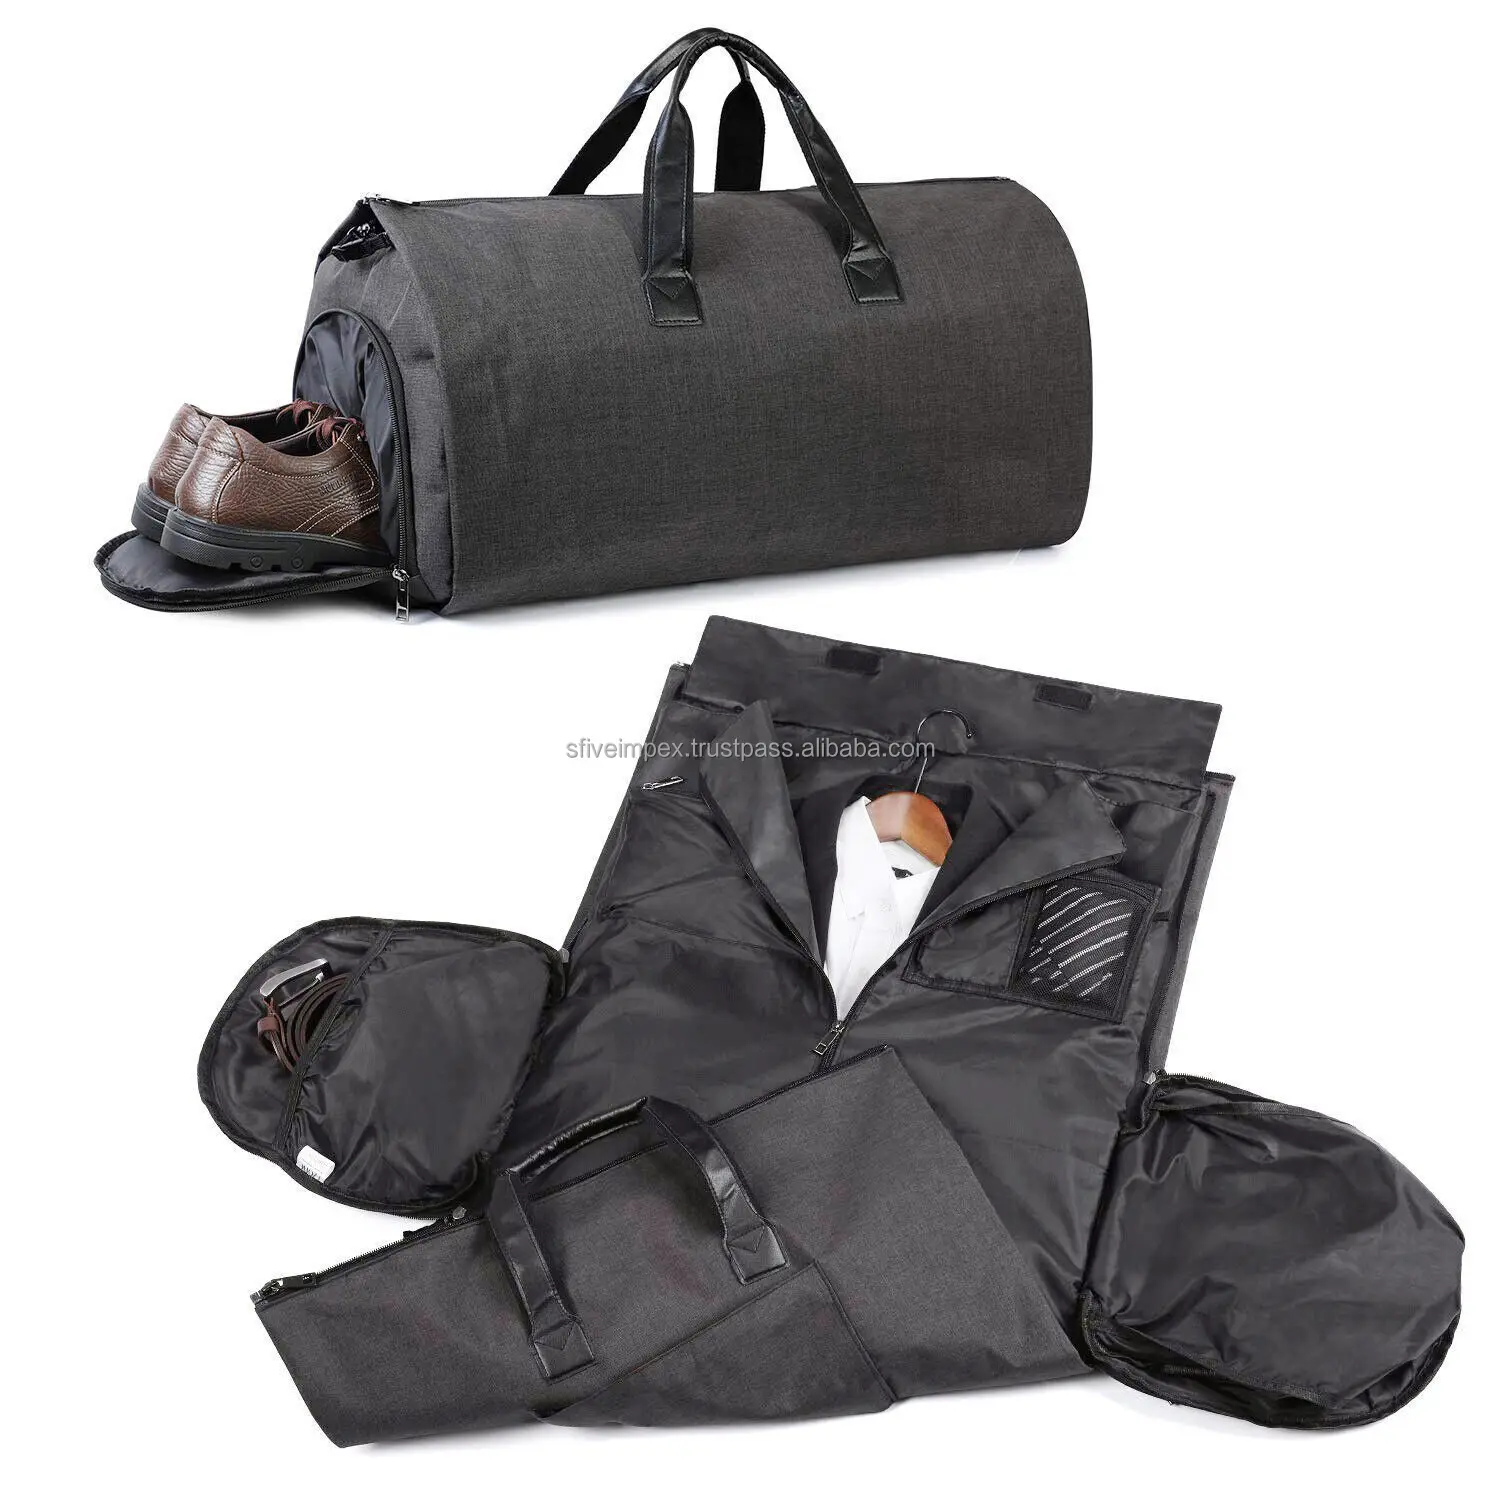 Convertible Garment Bag With Shoulder Strap,Shoes Compartment,Carry On ...